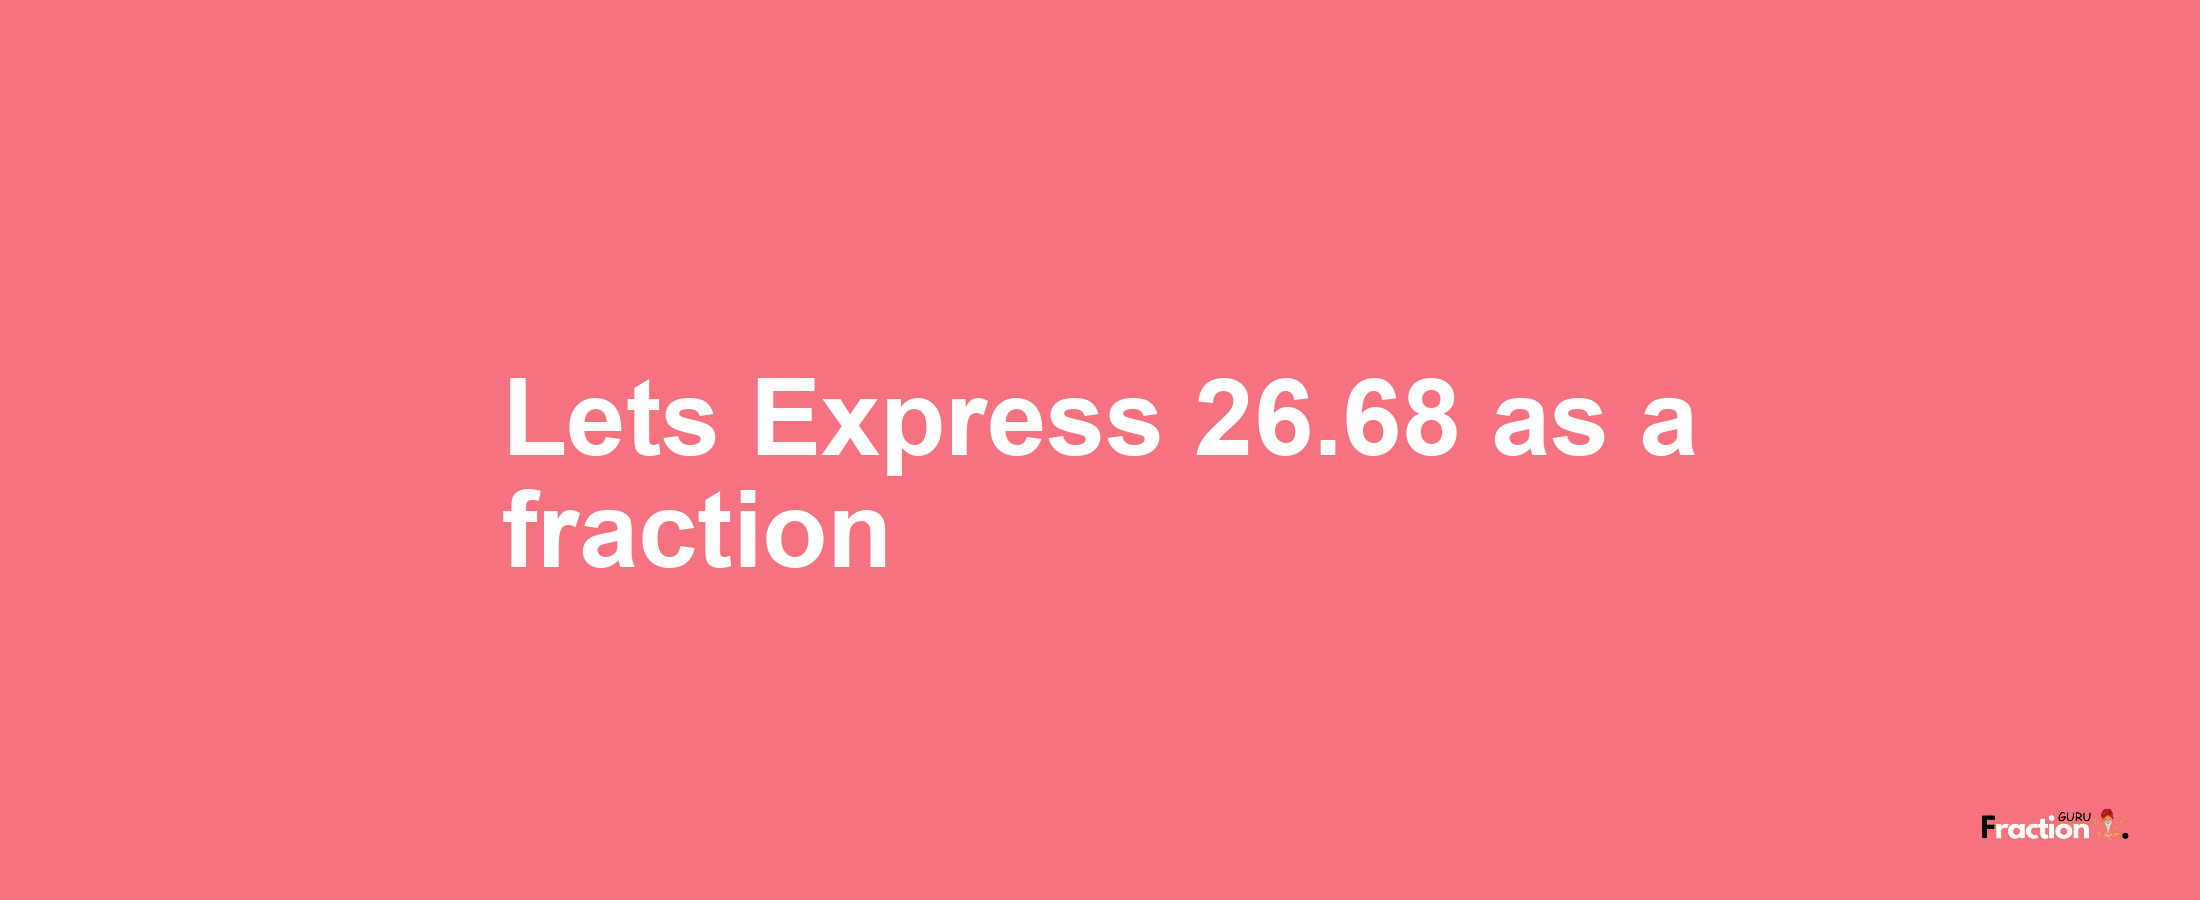 Lets Express 26.68 as afraction